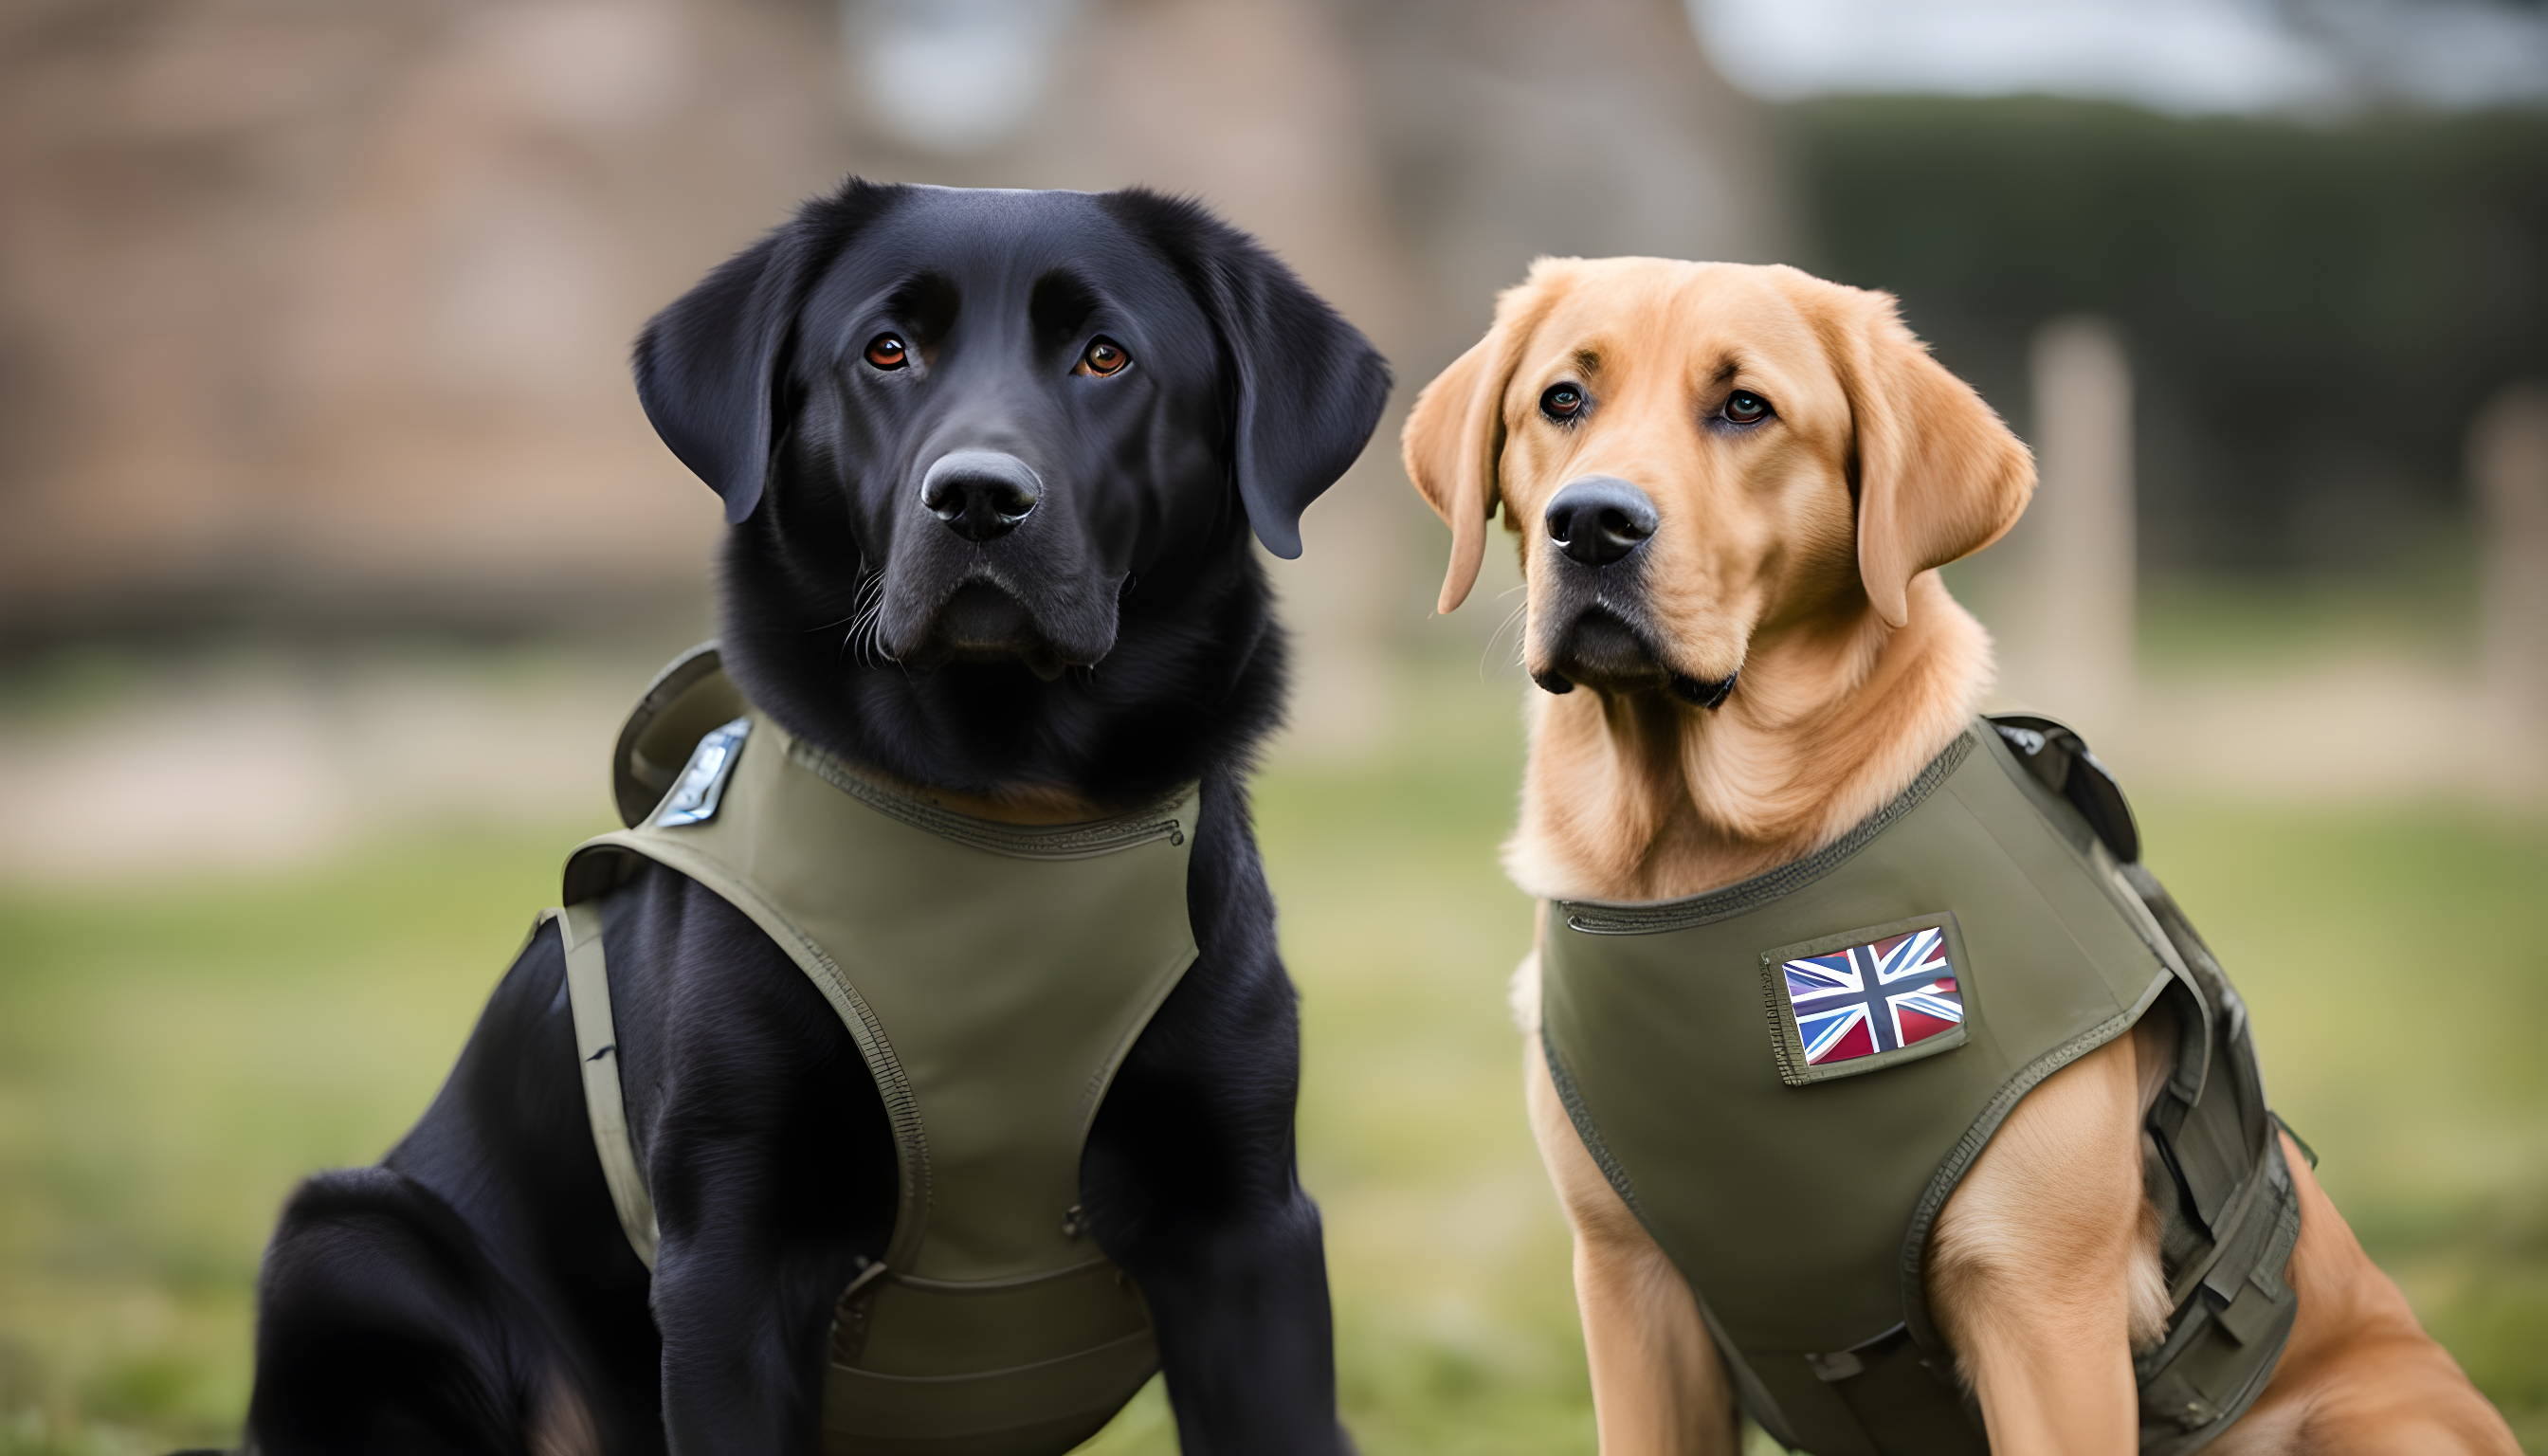 British Lab rocking a service vest and a 'Can I help you?' expression.